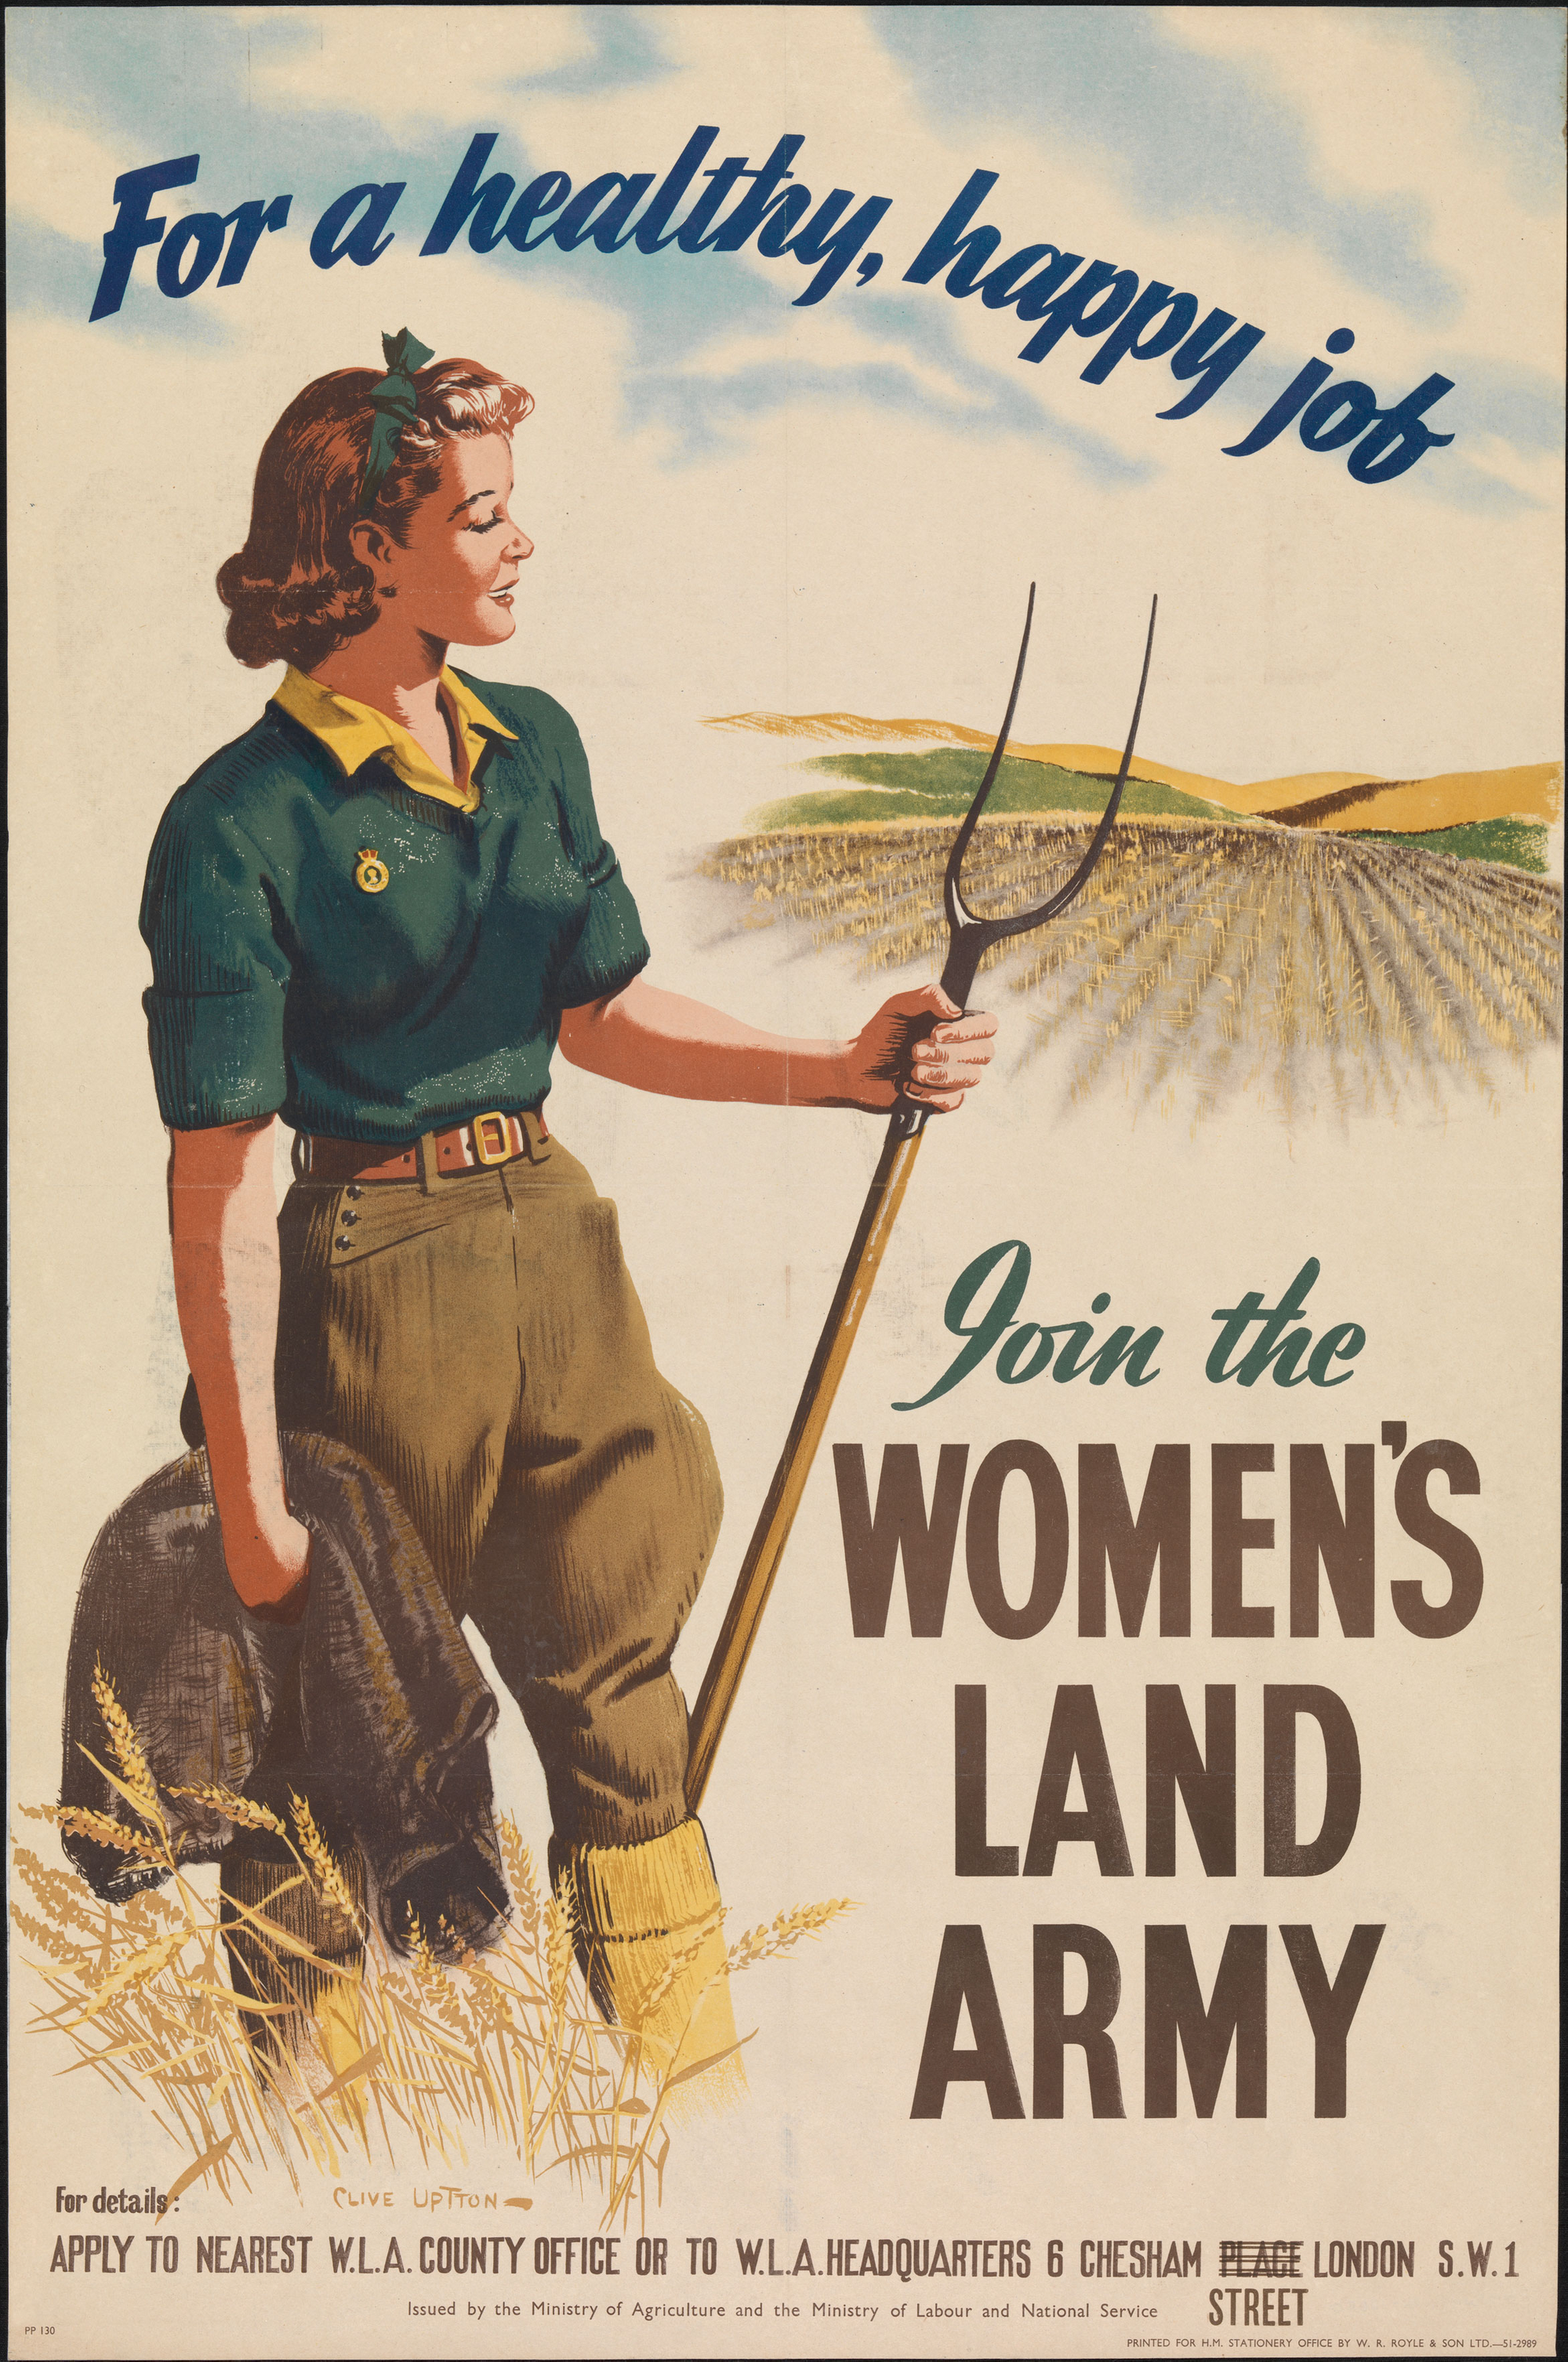 Vintage poster saying "For a healthy, happy job, join the Women's Land Army"